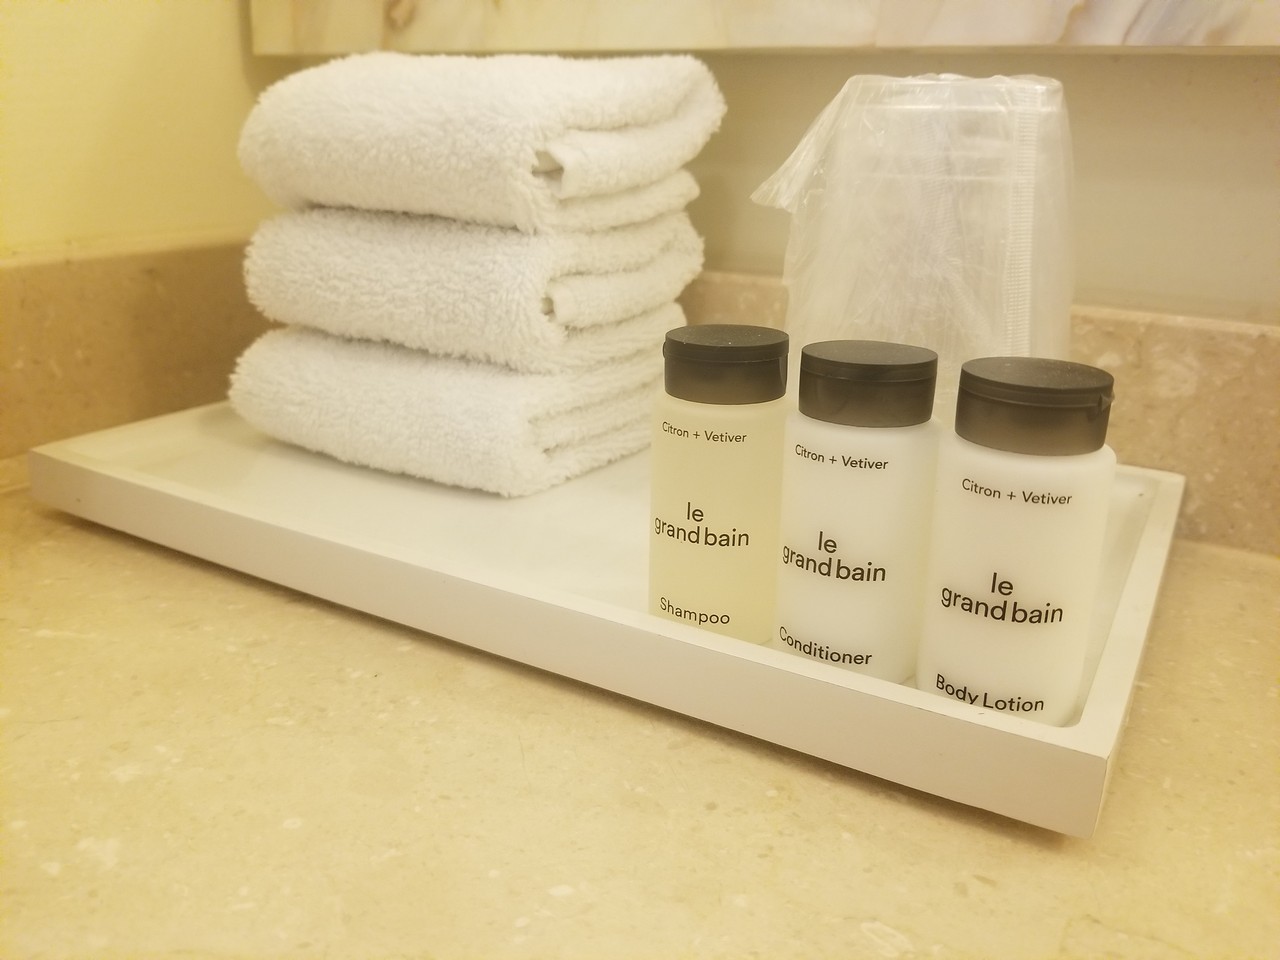 a white towel and bottles on a tray